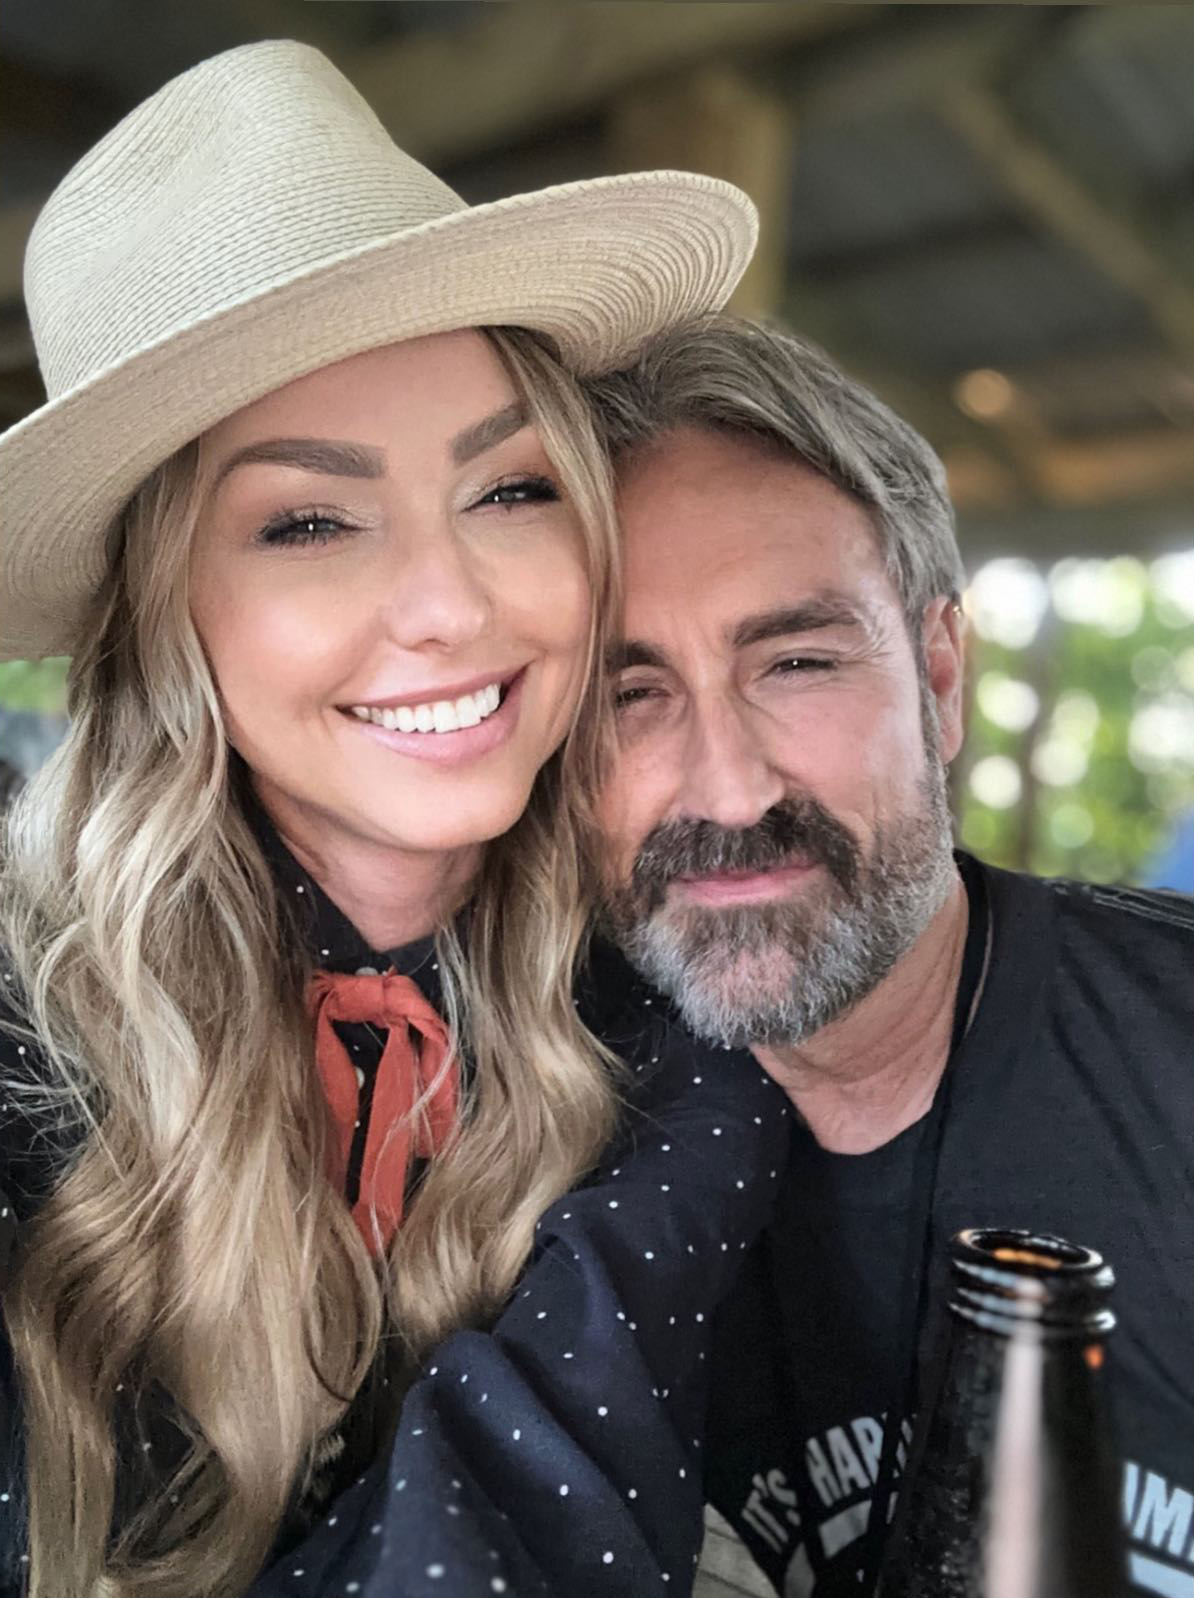 Leticia pictured with her boyfriend Mike Wolfe